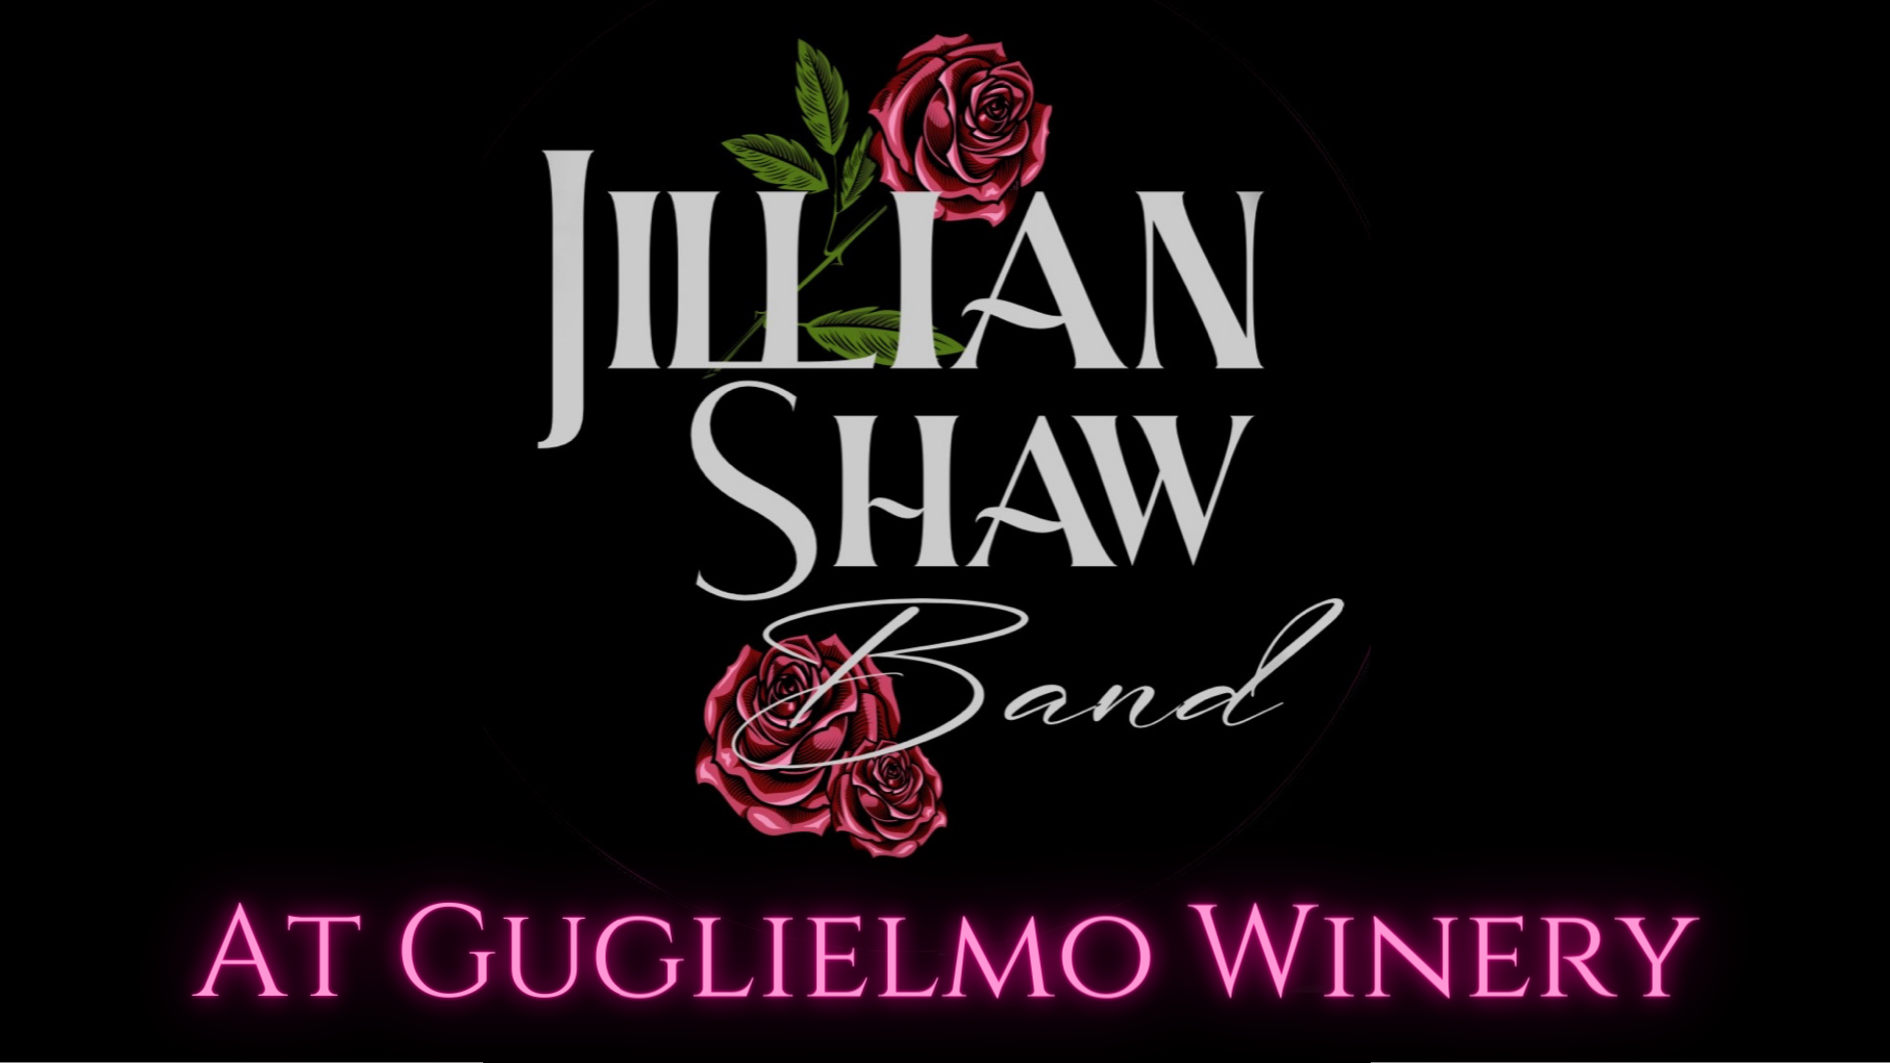 Relax with live music by the Jillian Shaw Band